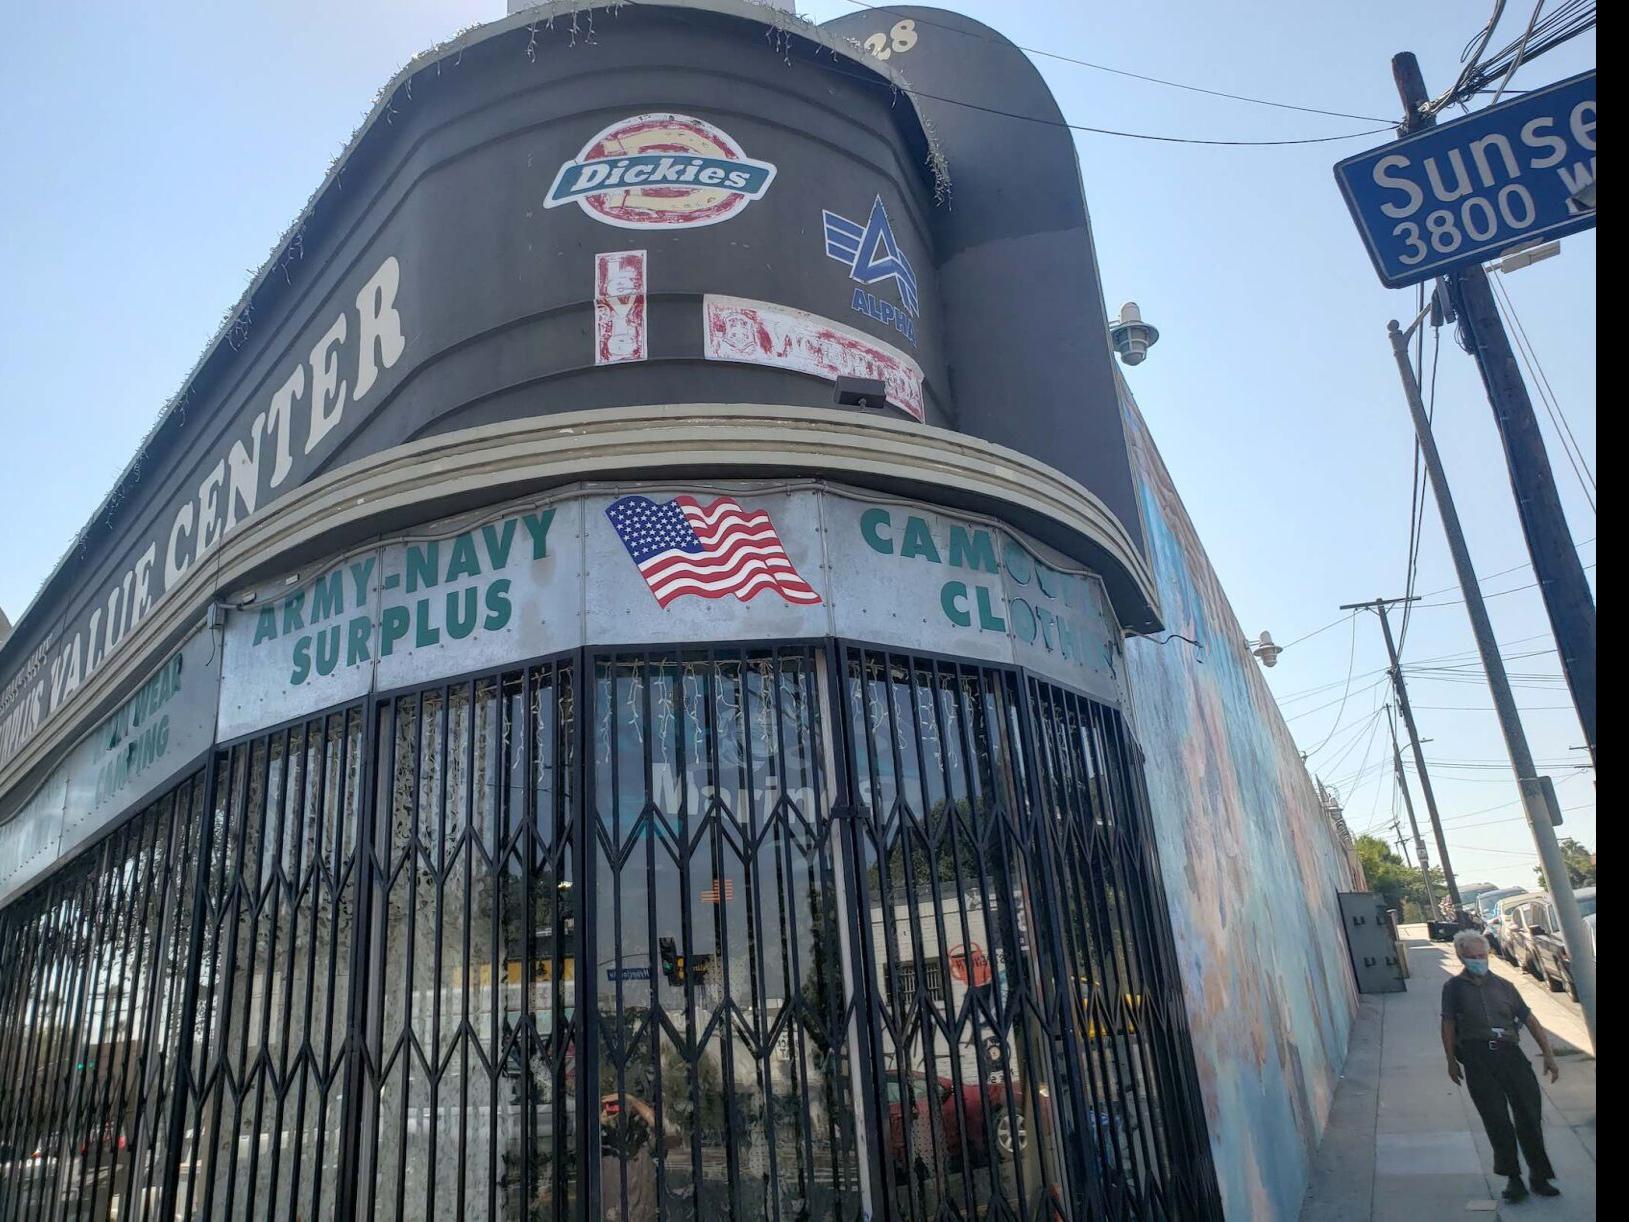 Long-time Silver Lake military surplus store closes down and clears out, Silver Lake News